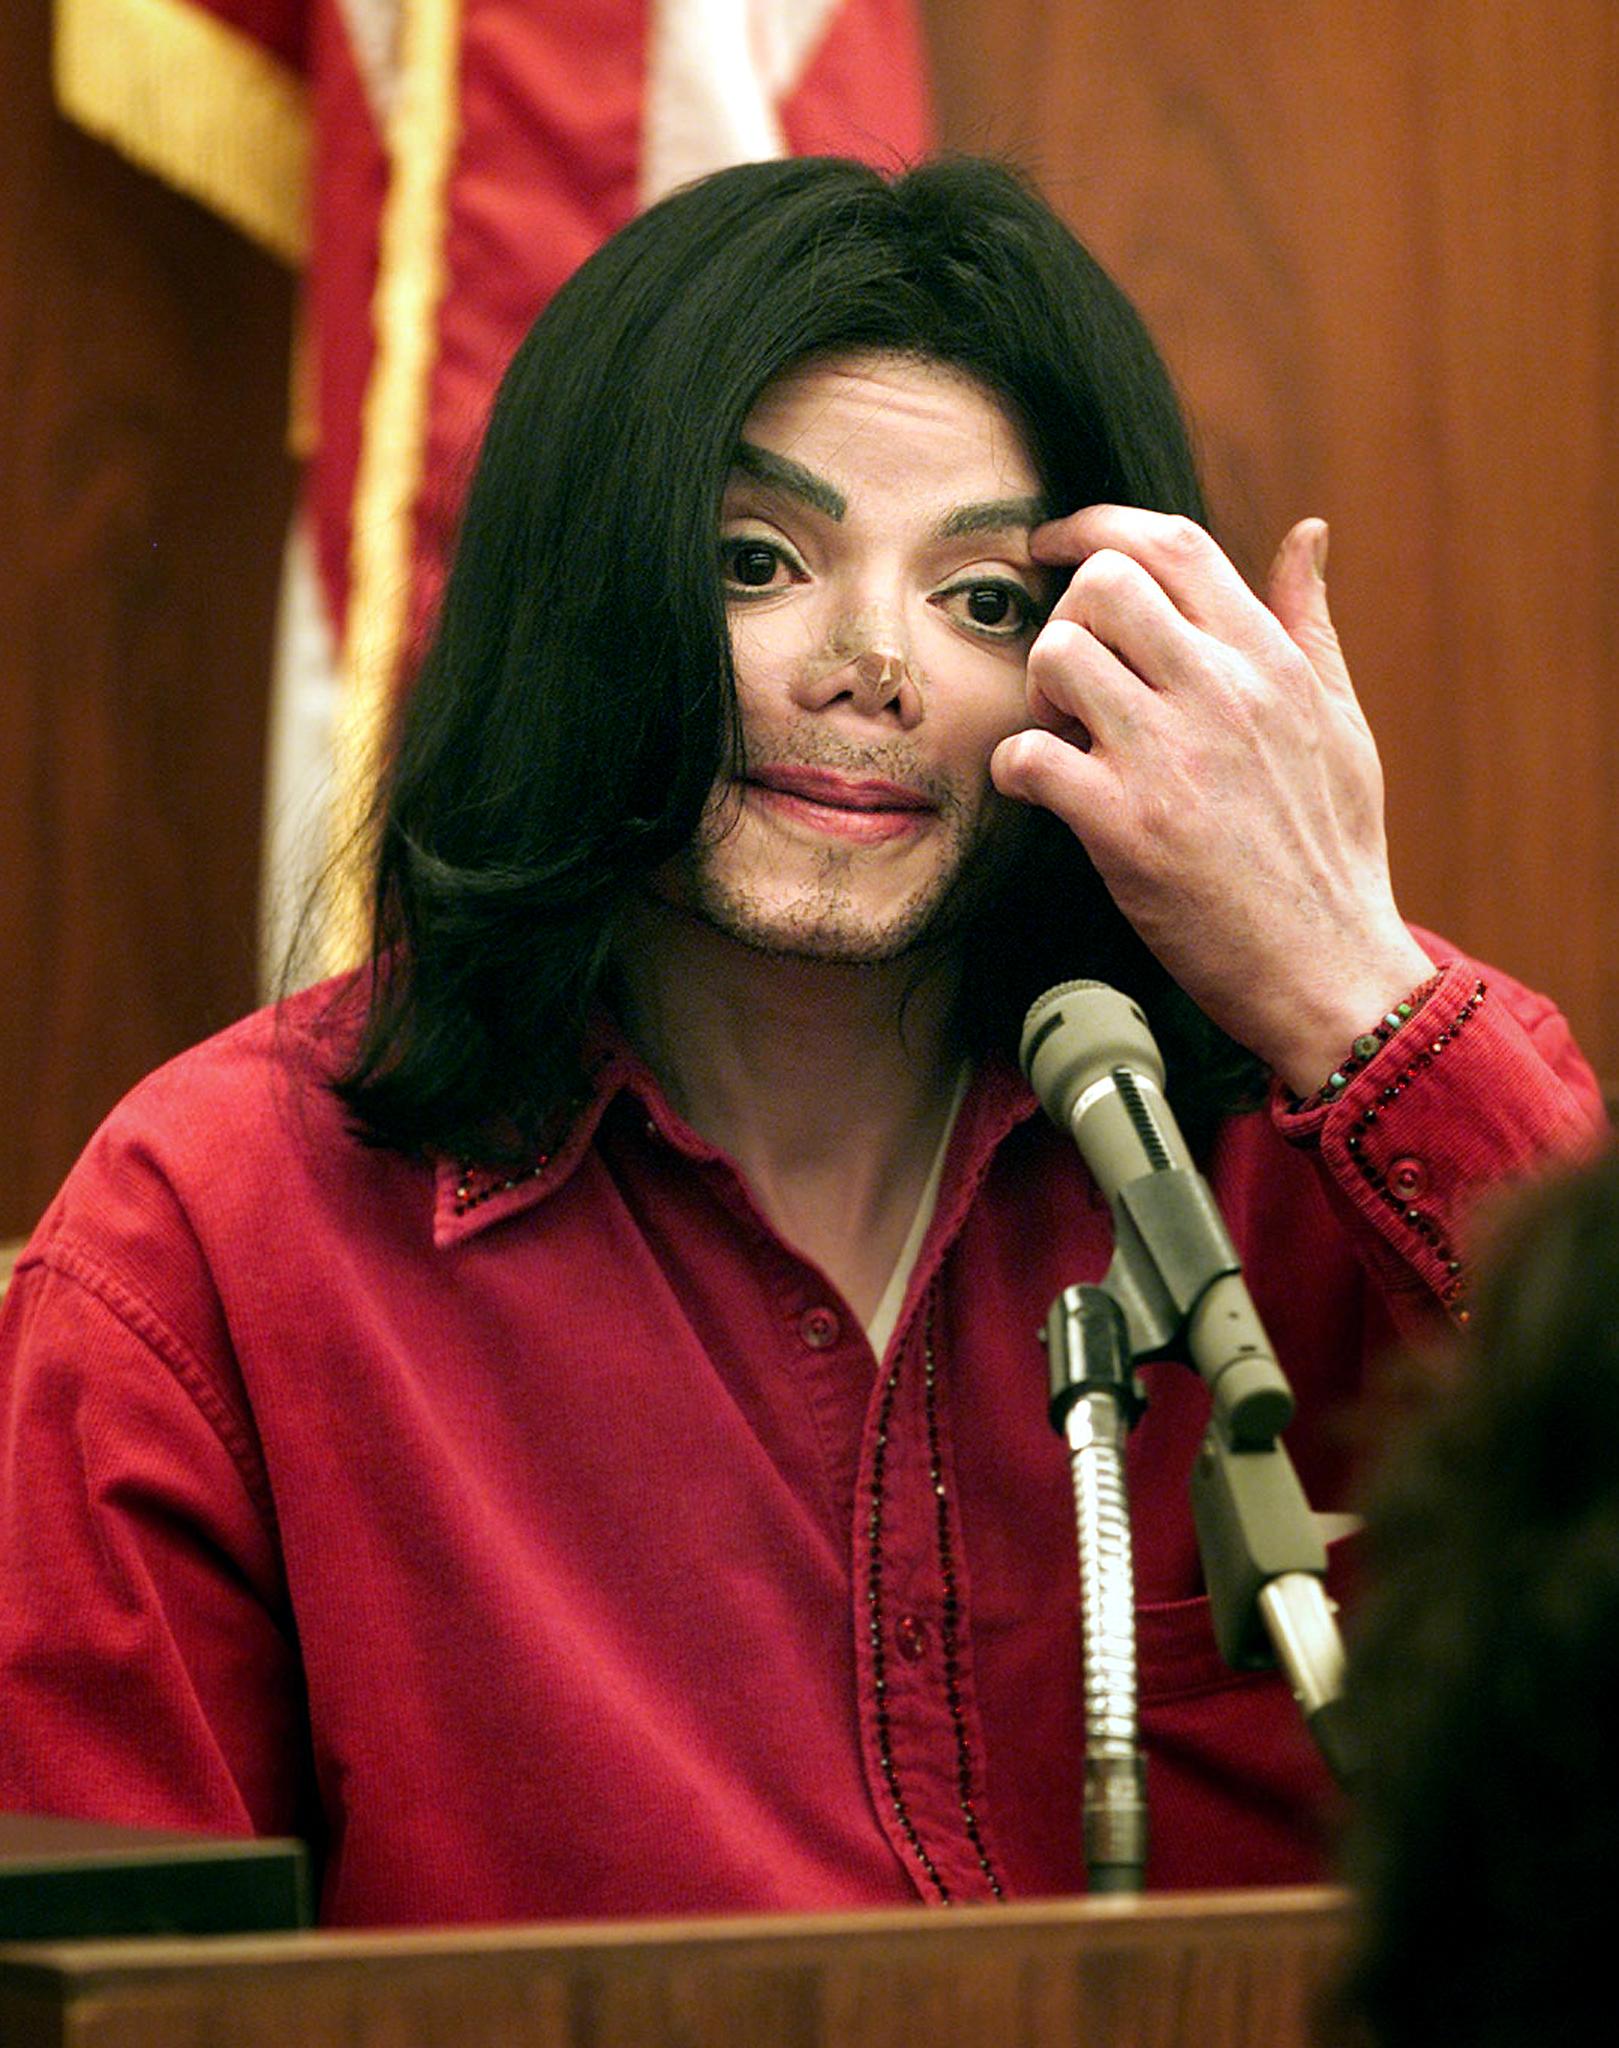 Michael Jackson in 2002 | Source: Getty Images